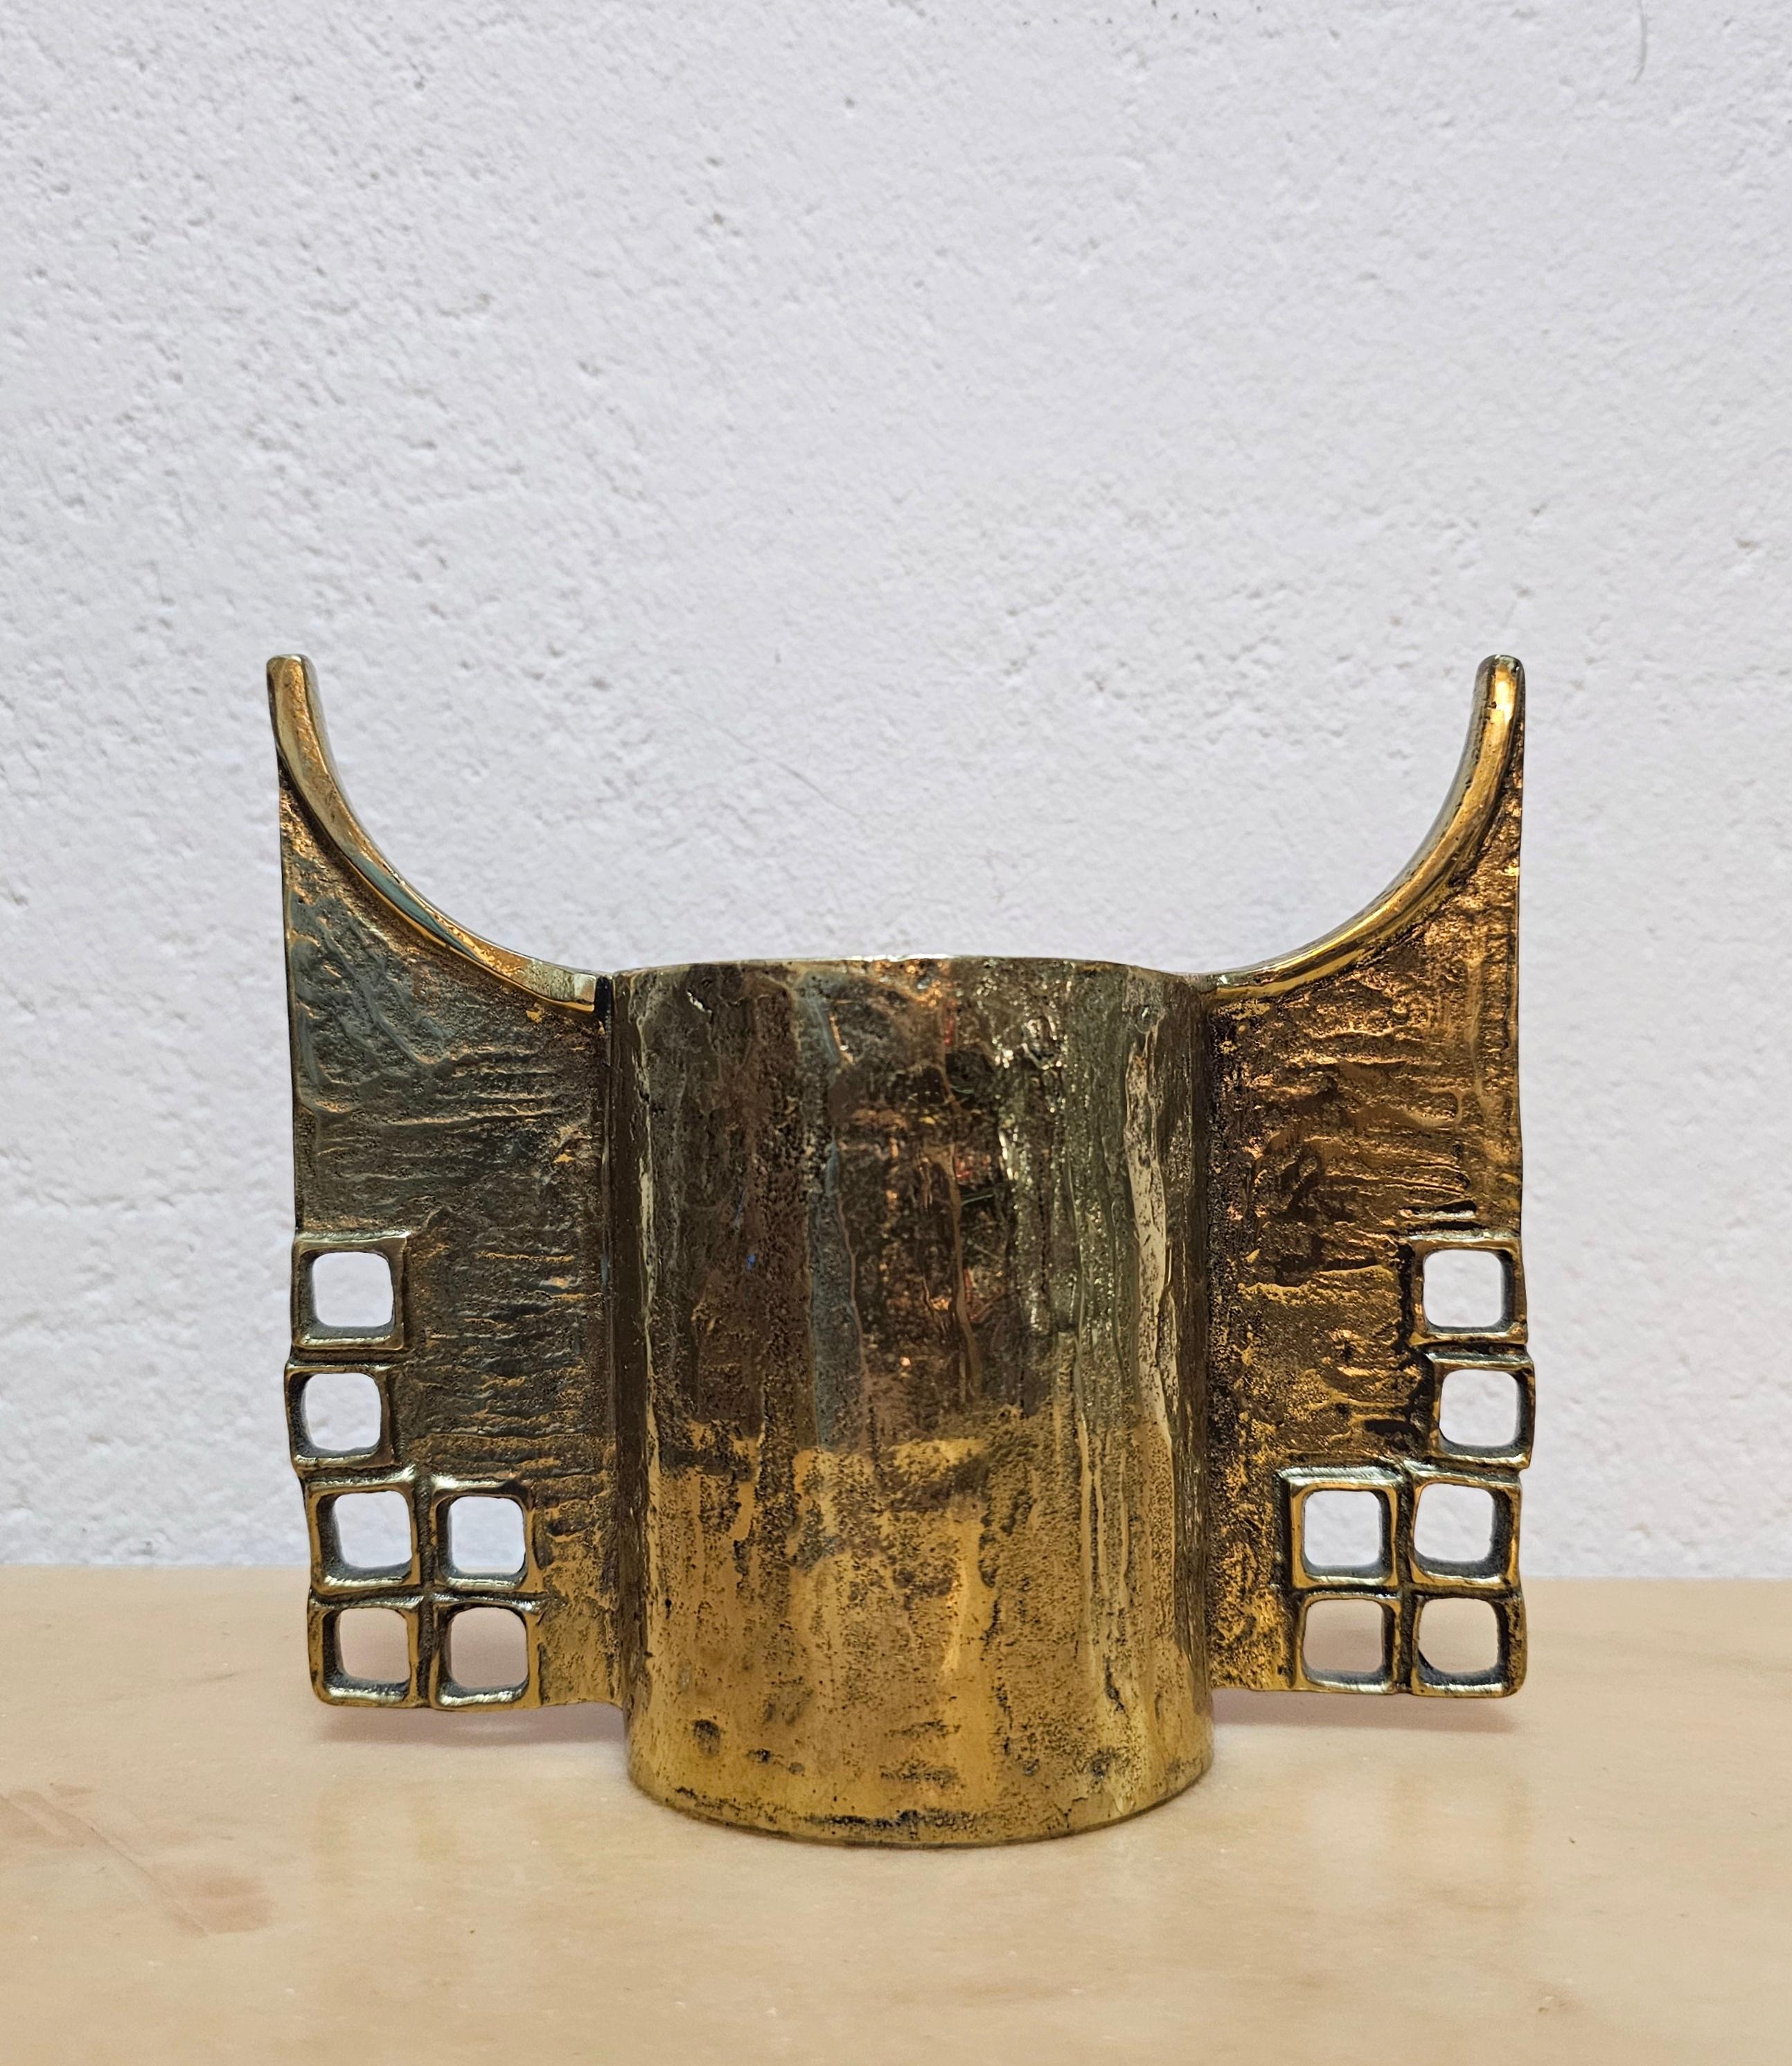 In this listing you will find an extremely rare and absolutely extraordinary sculptural Brutalist candle holder done in gilt bronze. It was designed by Austrian designer Heinz Goll, who's work is often found at auctions in some of the biggest